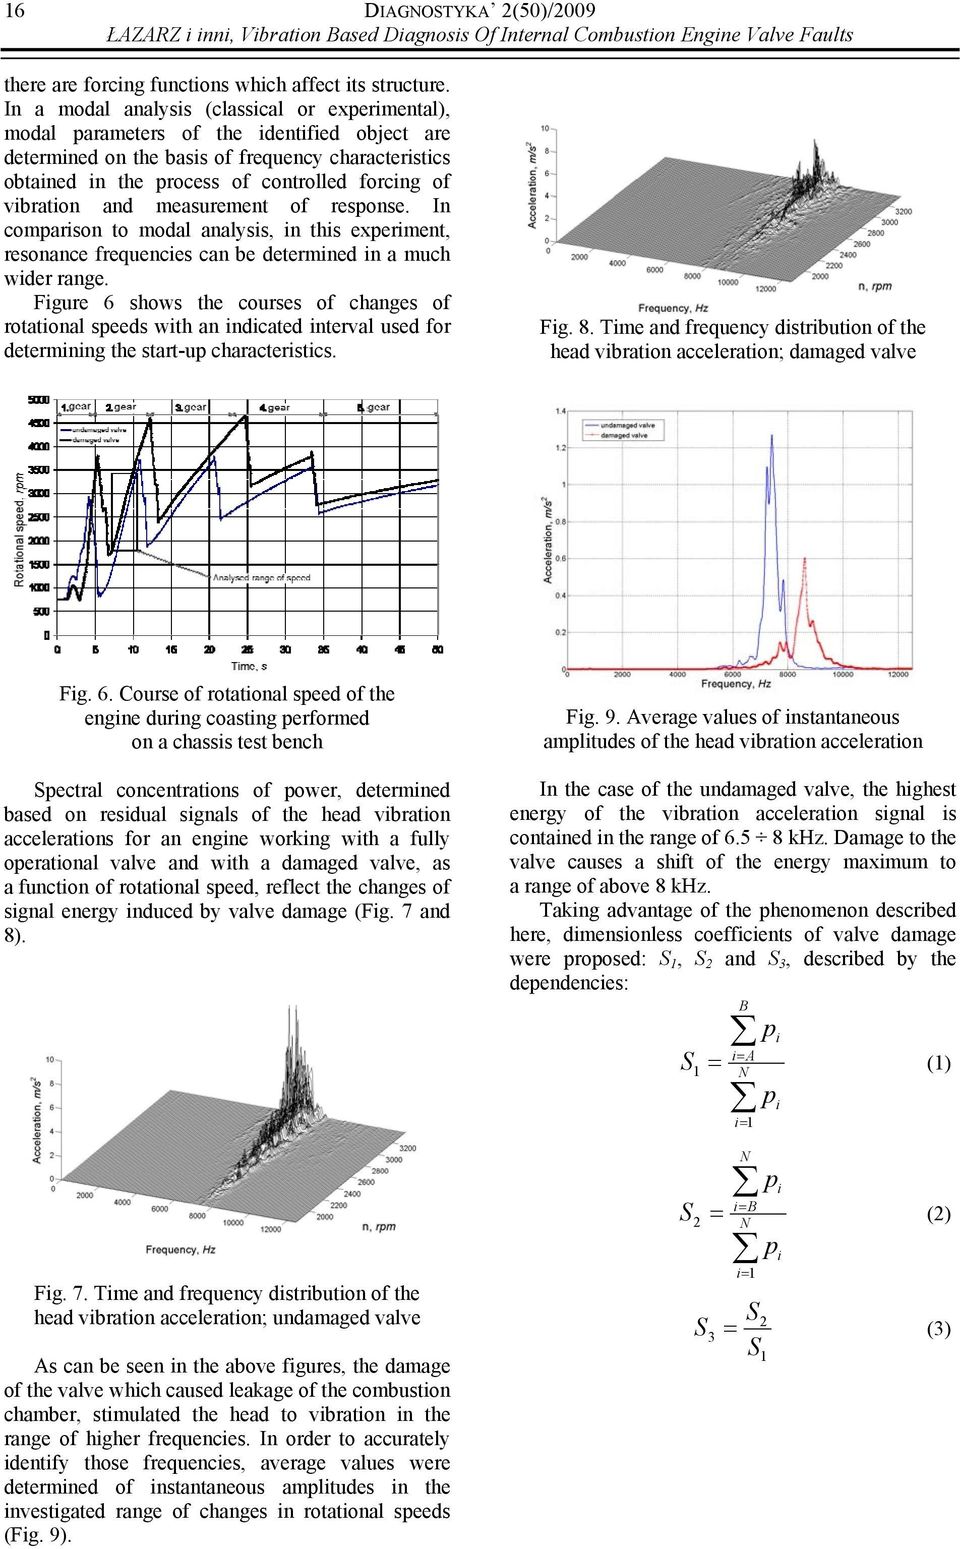 vibration and measurement of response. In comparison to modal analysis, in this experiment, resonance frequencies can be determined in a much wider range.